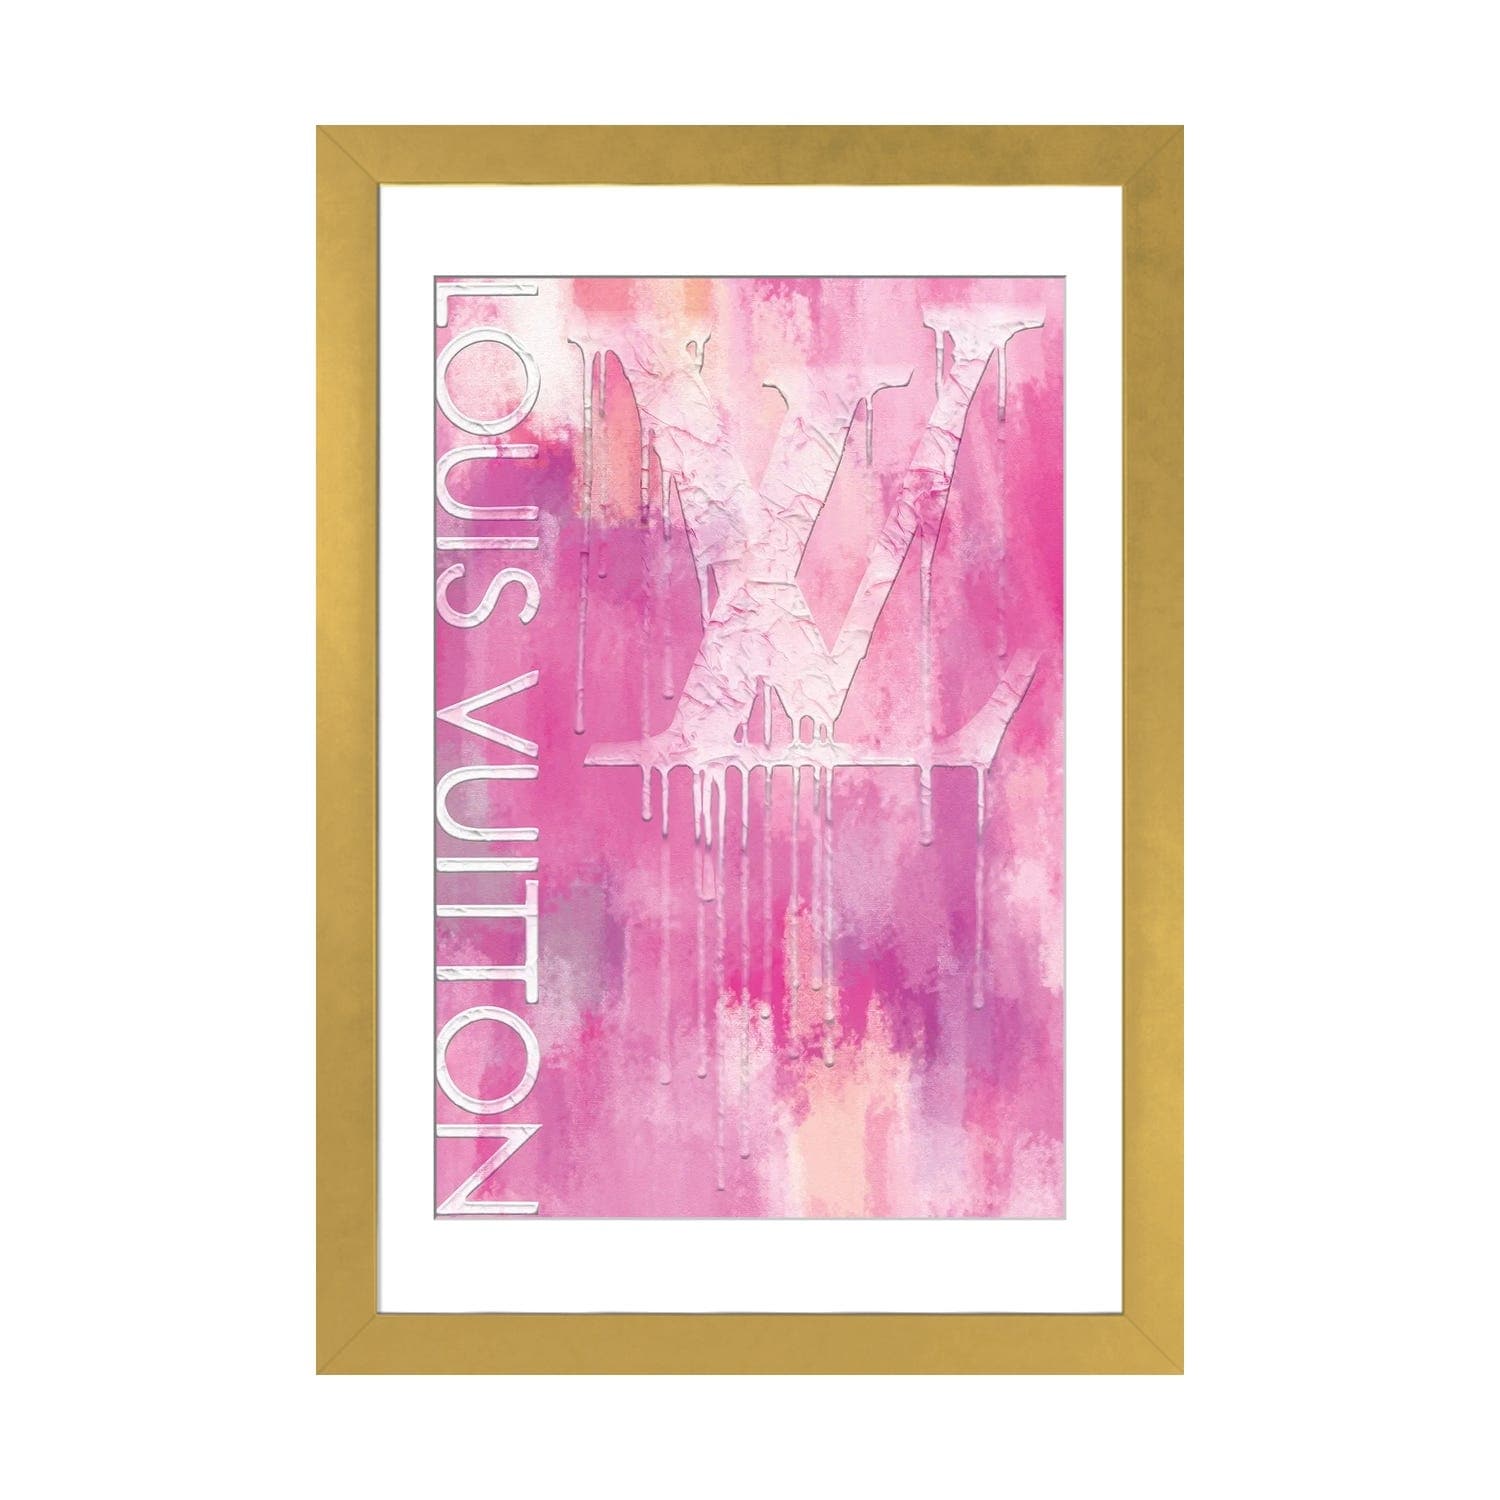 Framed Canvas Art (Gold Floating Frame) - Fashion Drips LV Pinkly by Pomaikai Barron ( Fashion > Fashion Brands > Louis Vuitton art) - 26x18 in